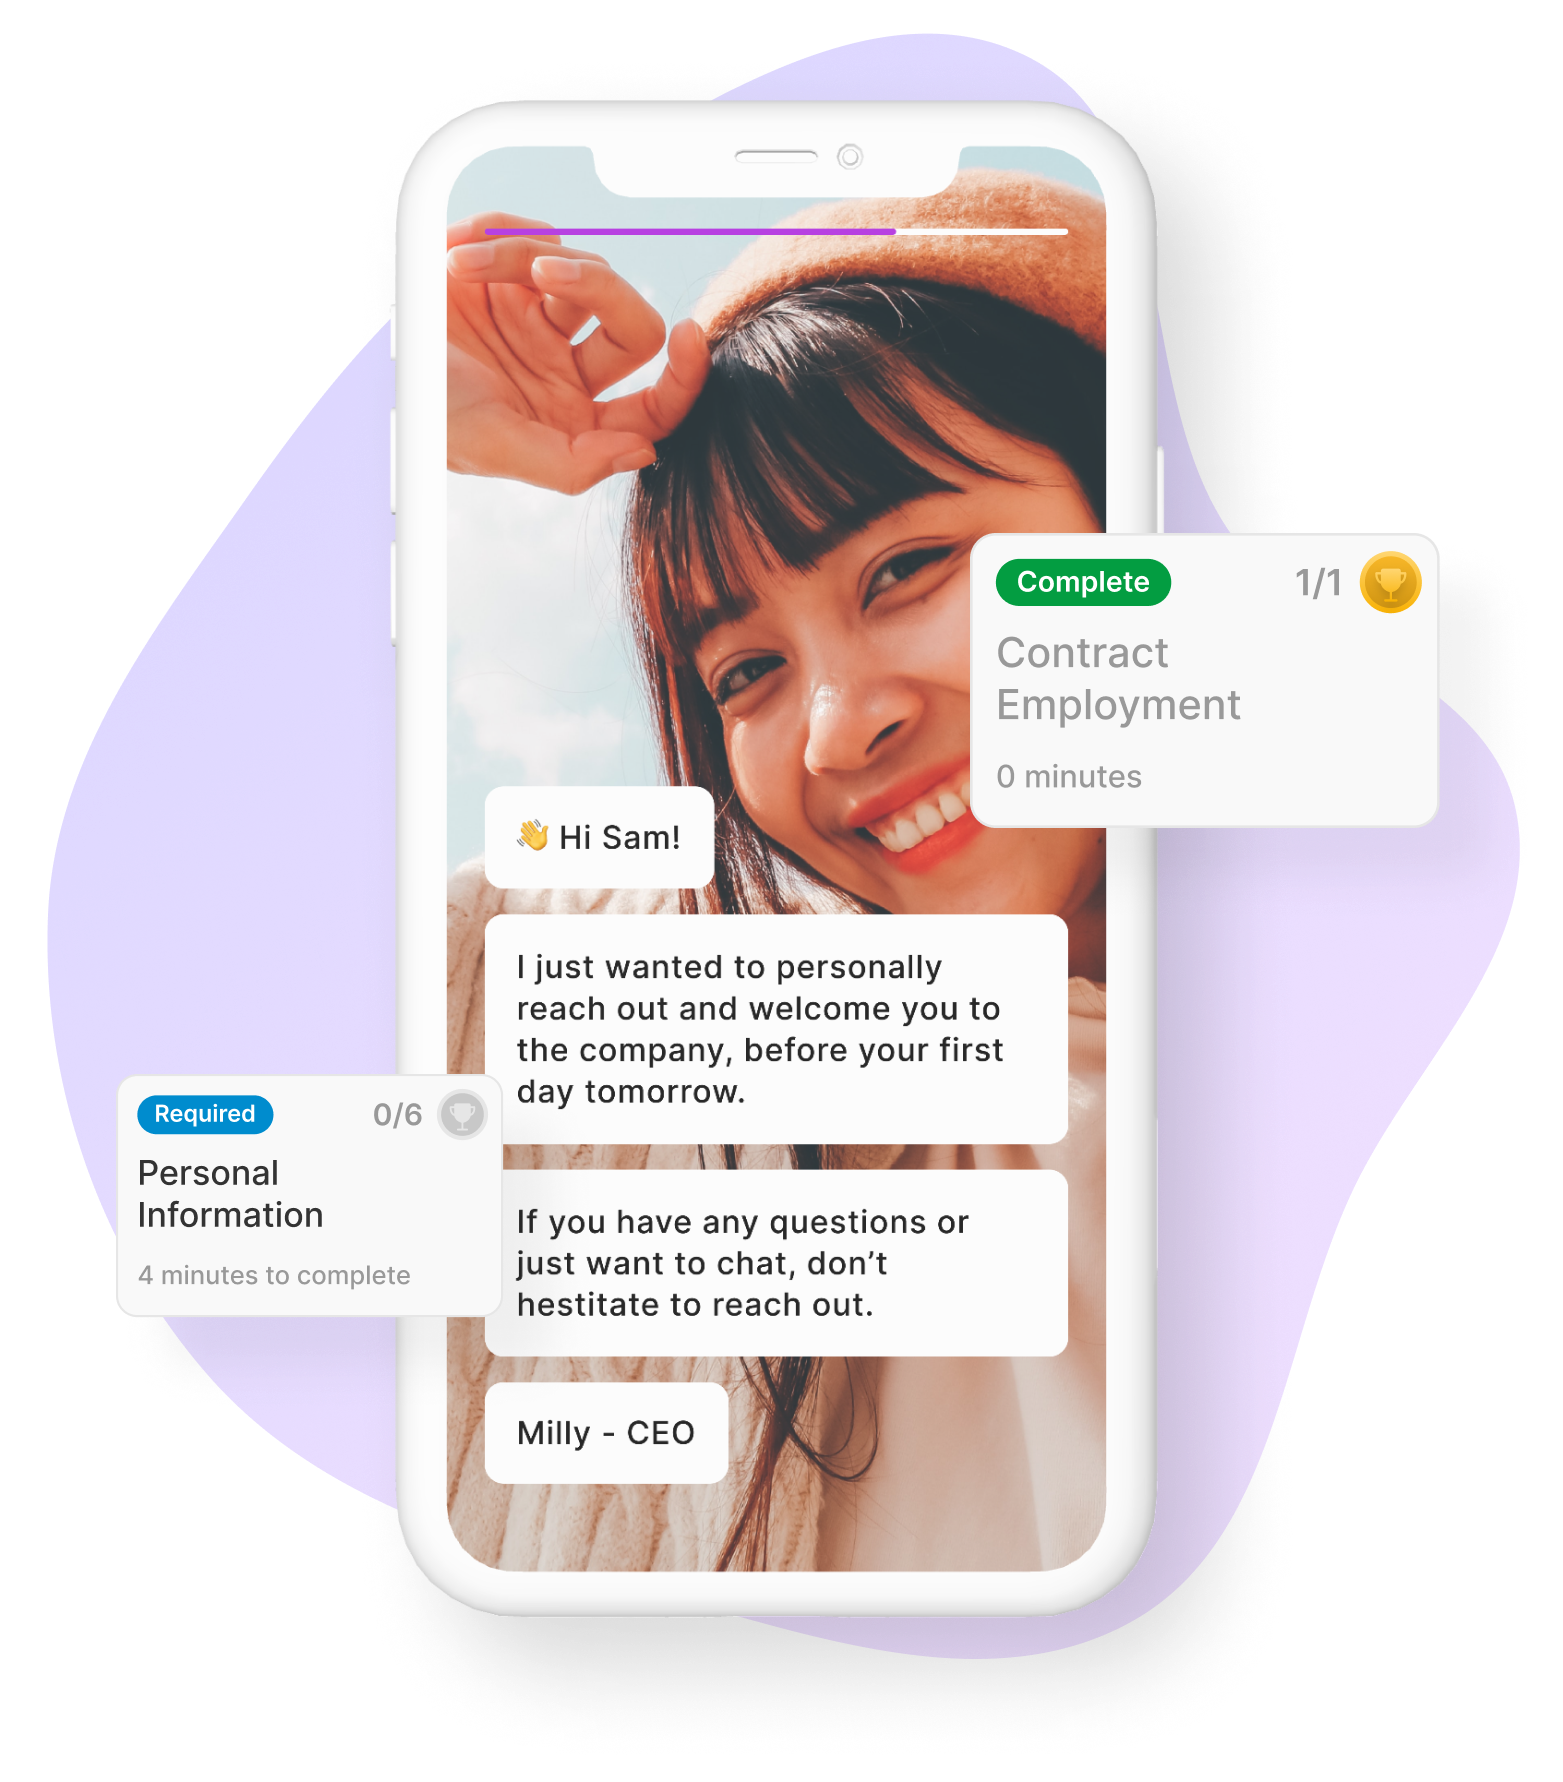 KnowMy real-time conversation